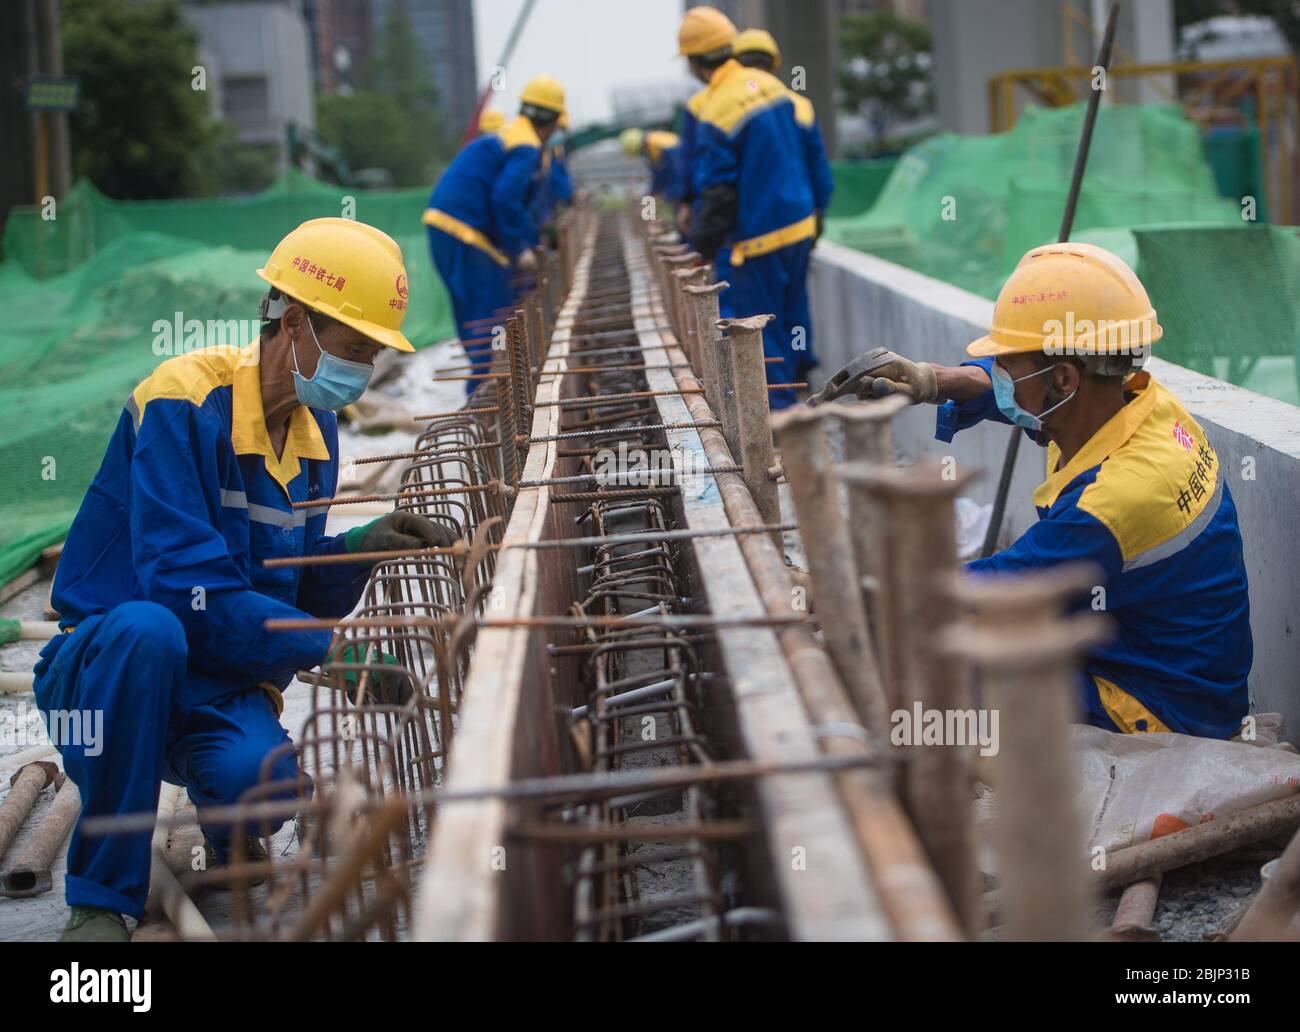 Wuhan, China. 30th Apr, 2020. People work at a construction site of a utility tunnel in Wuhan, central China's Hubei Province, April 30, 2020. The project of utility tunnel here, a passage built to carry utility lines, has resumed construction since the end of March. (Xinhua/Xiao Yijiu) Credit: Xinhua/Alamy Live News Stock Photo